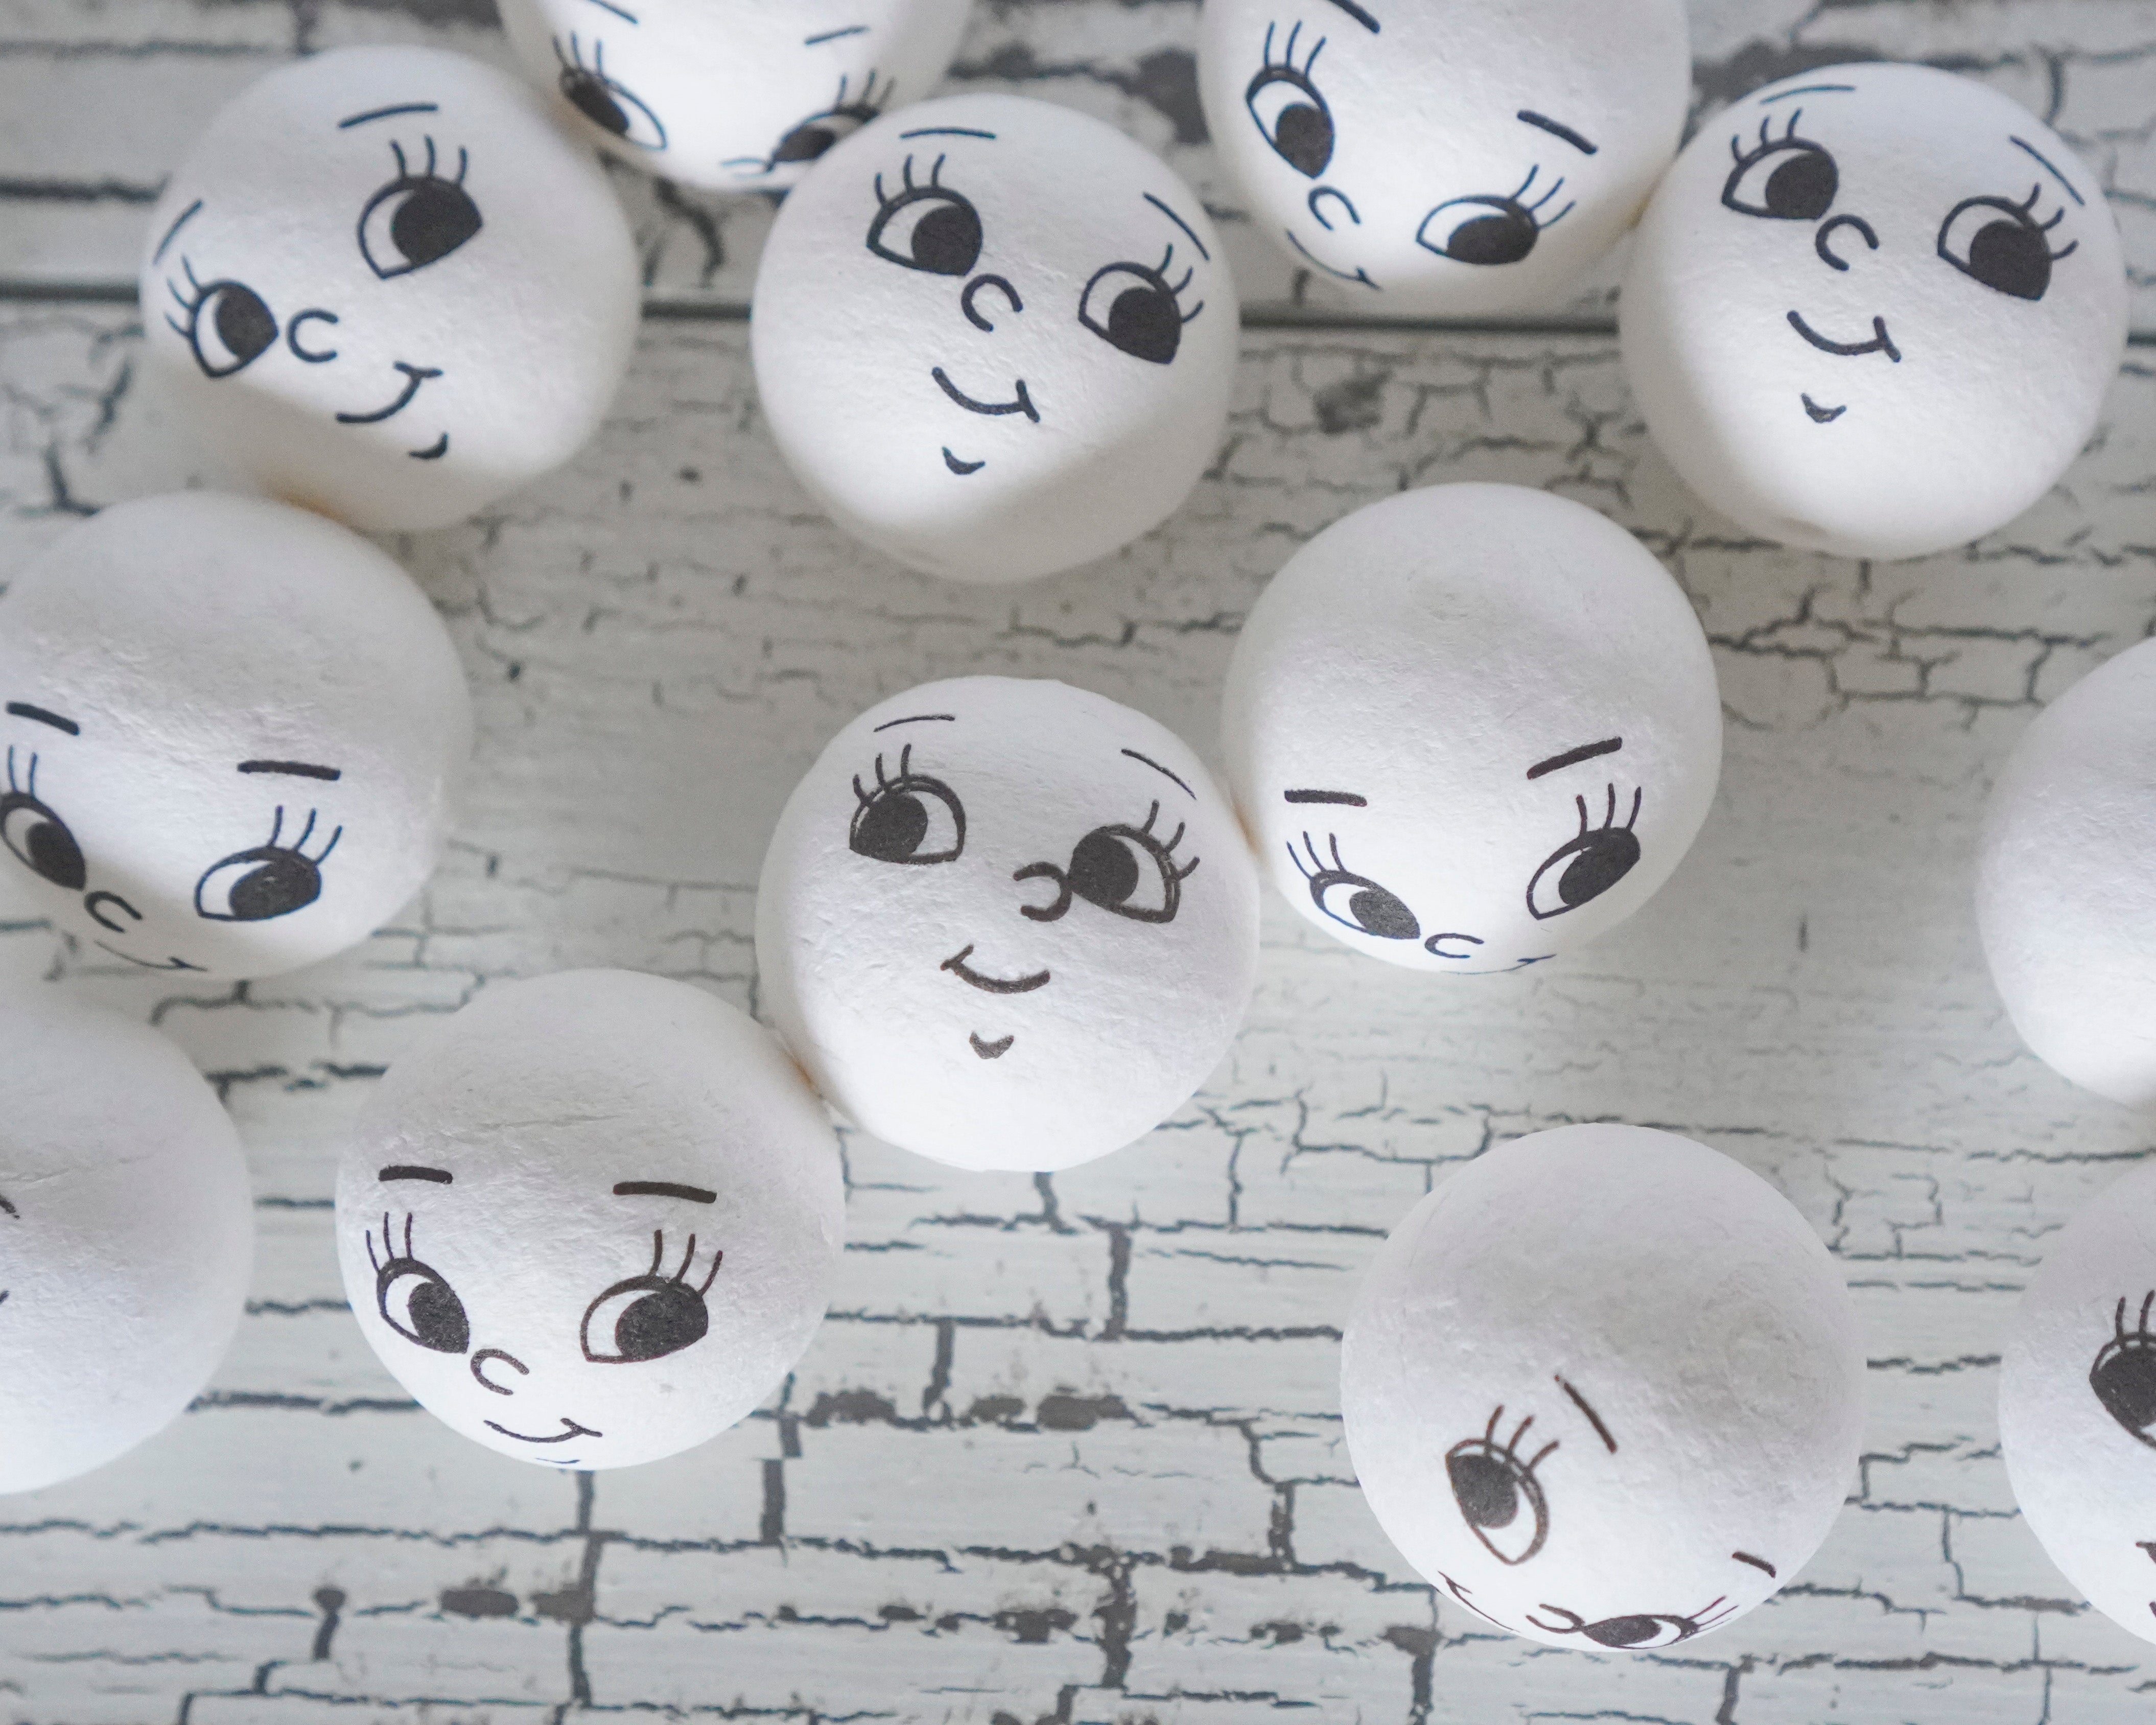 30mm Spun Cotton Heads: BRIGHT EYES - Vintage-Style Craft Heads with Faces, 12 Pcs.